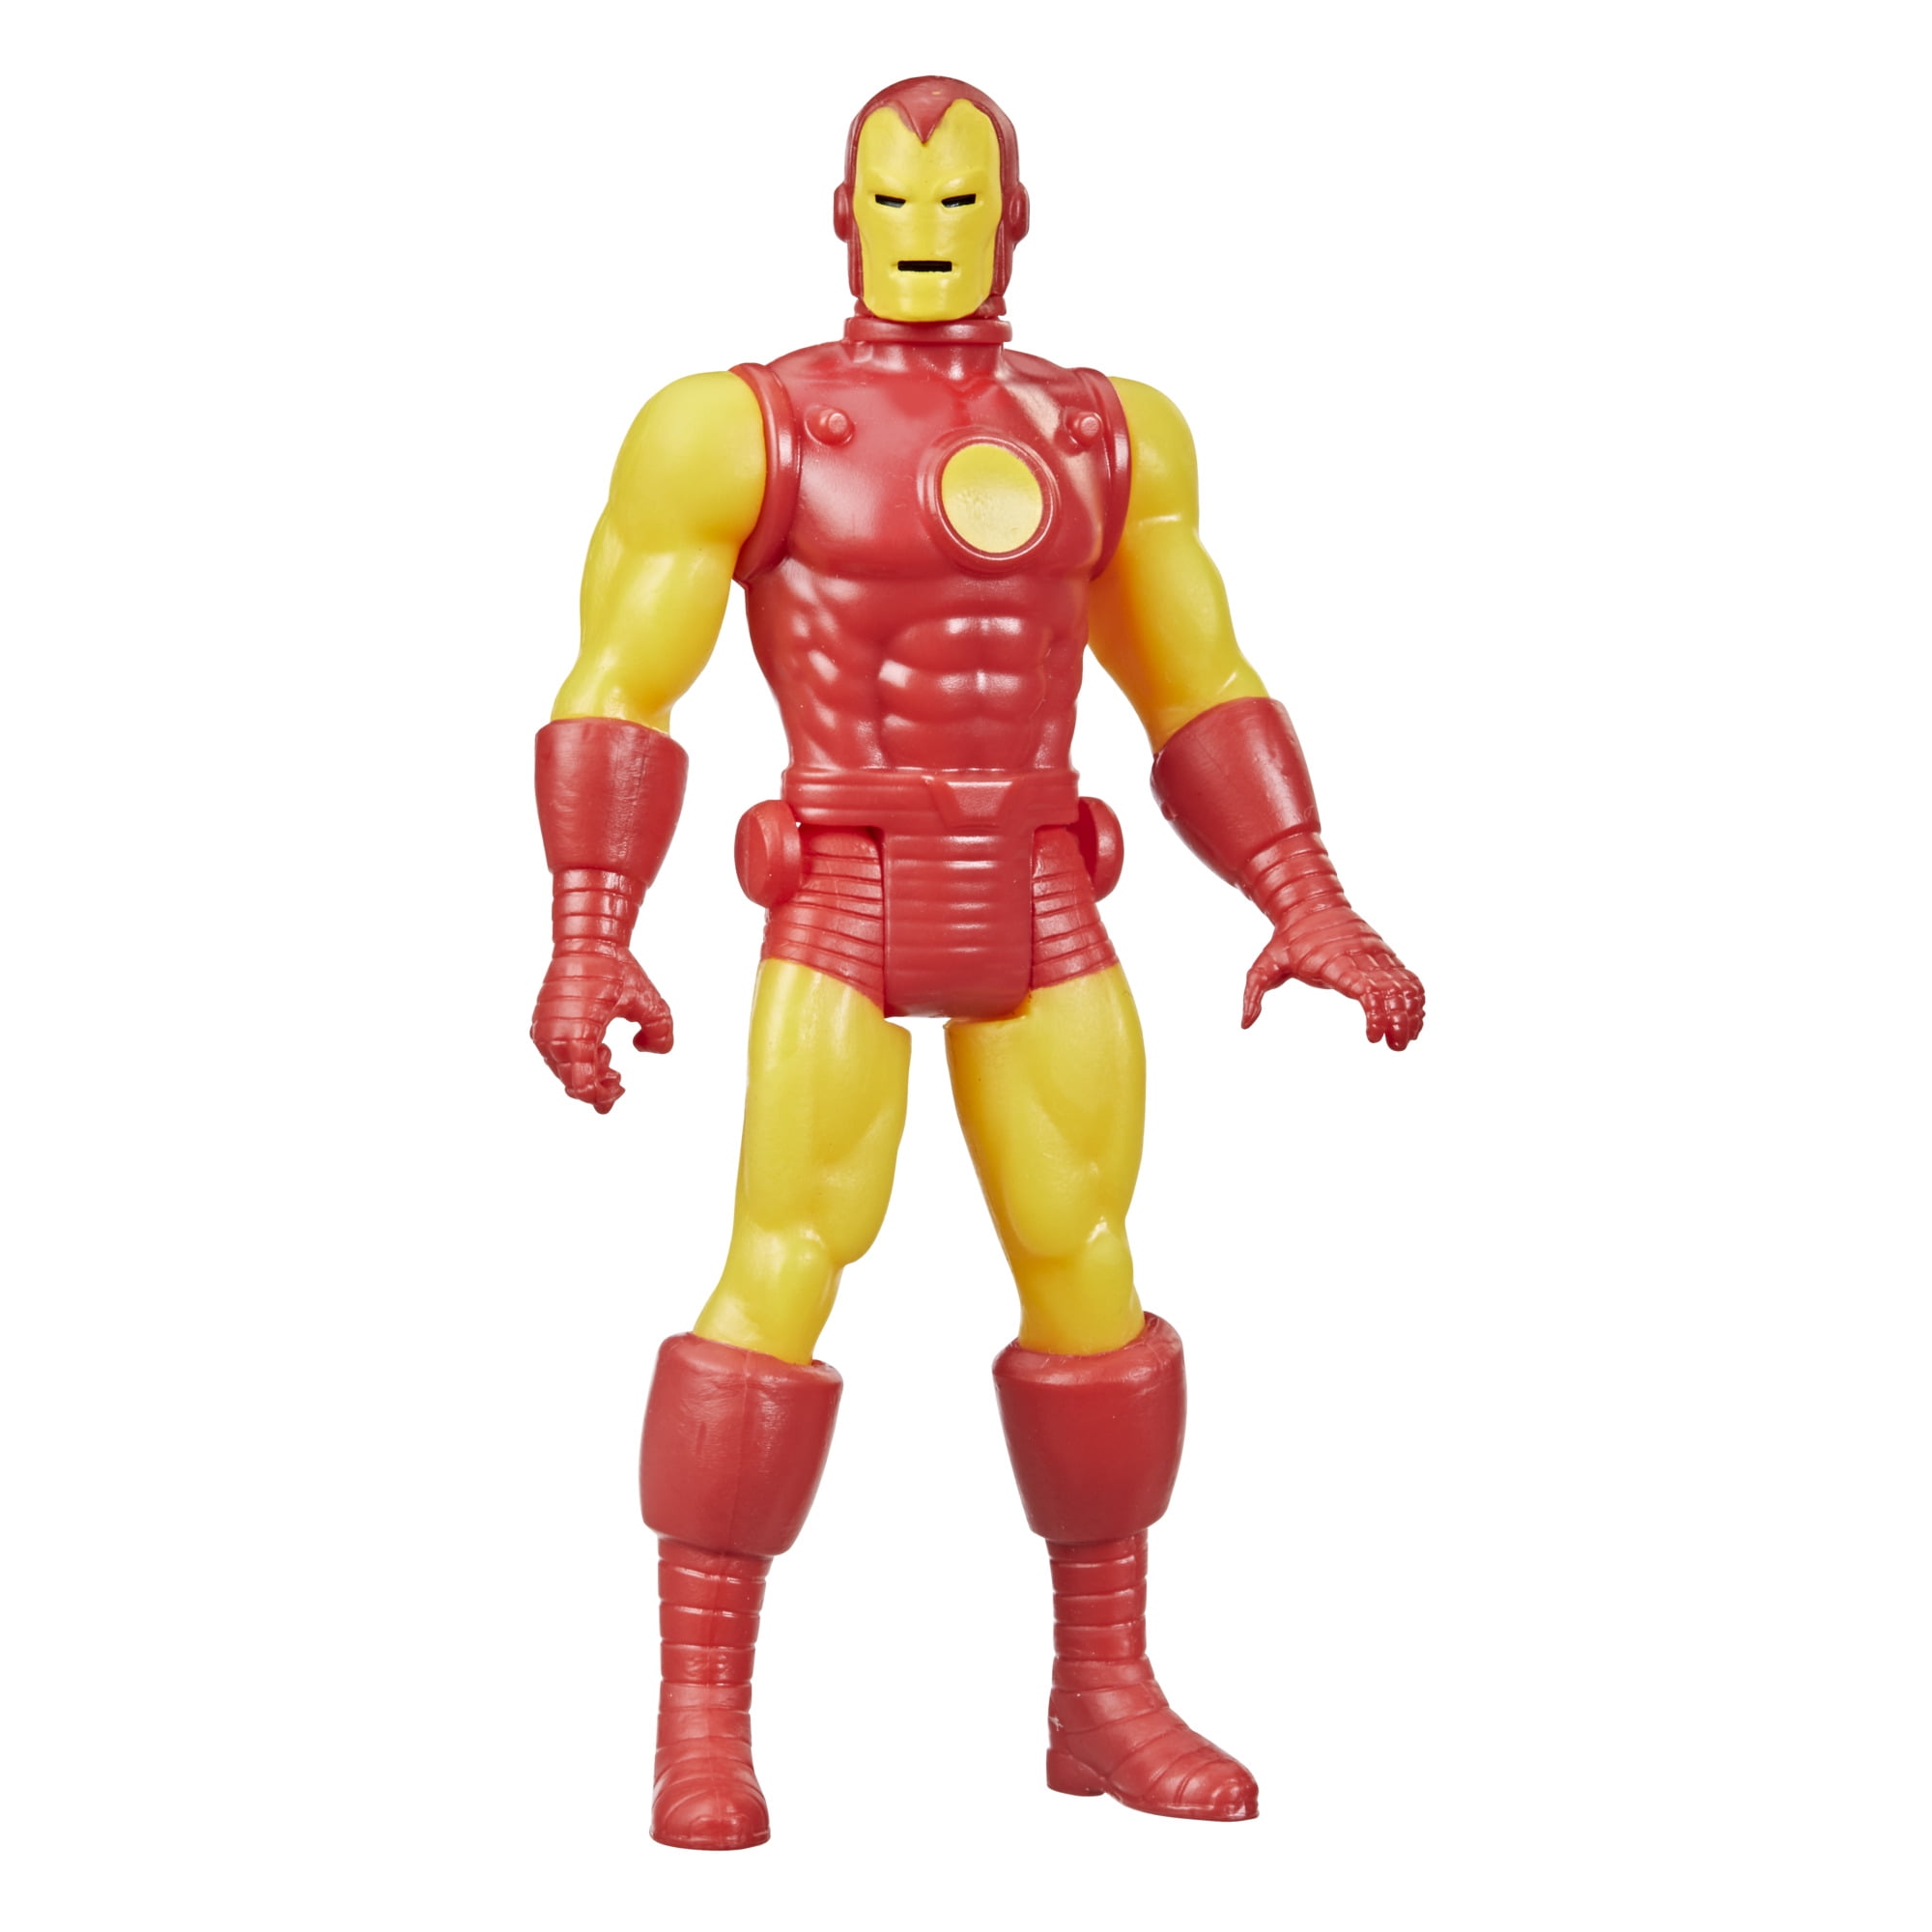 FAST & FREE SHIPPING Marvel Retro 6-inch Collection Iron Man Figure